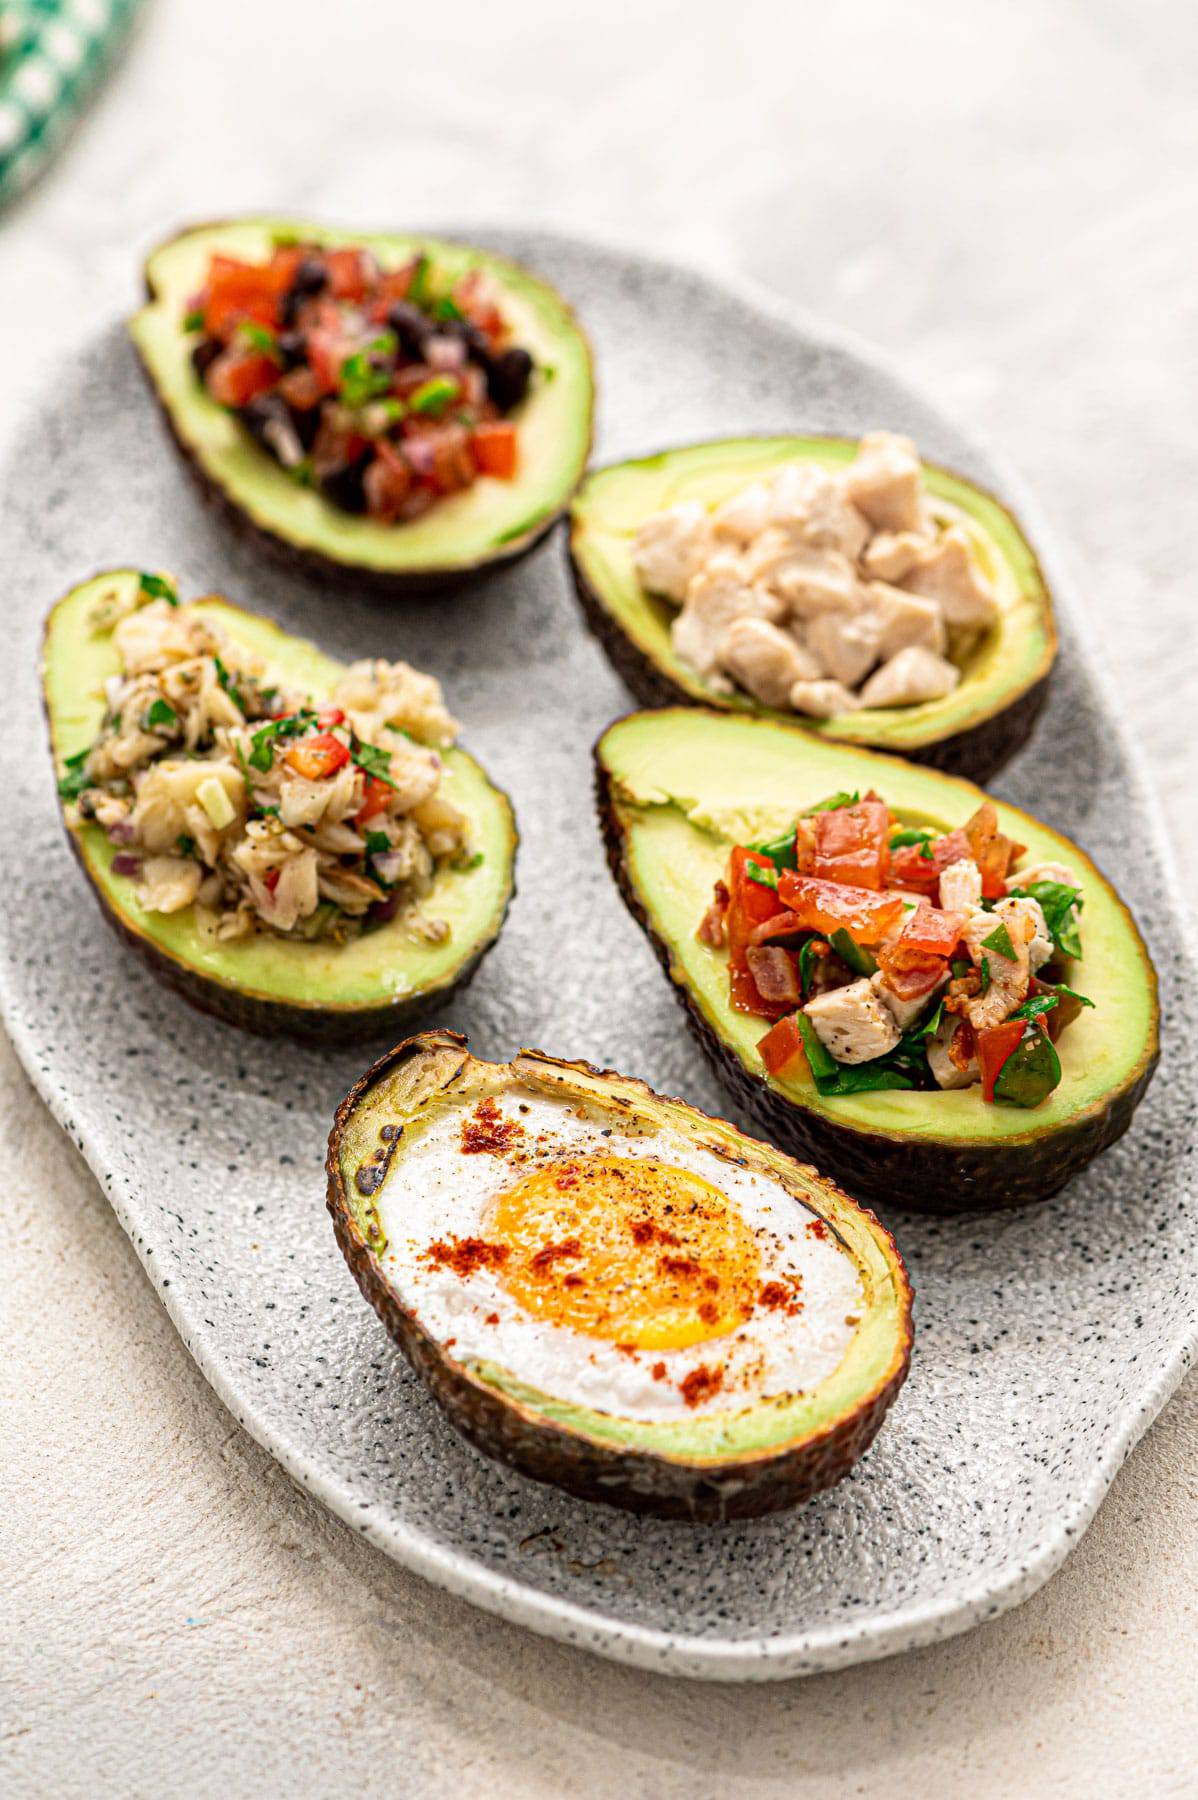 Avocado boats filled with five different options.